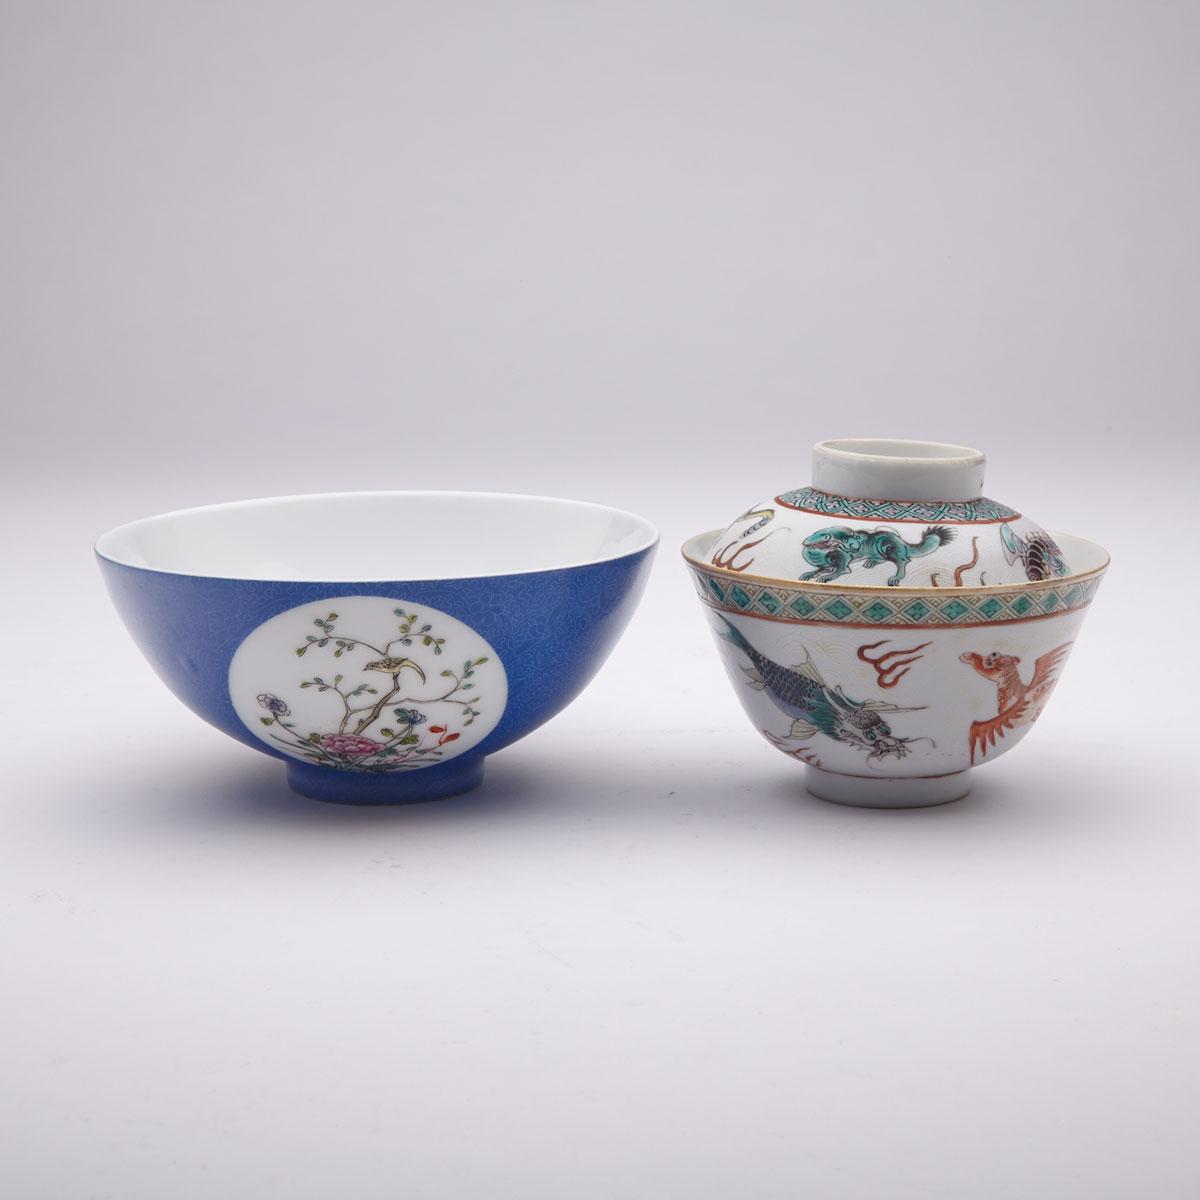 A Famille Rose and a Wucai Bowl, Guangxu Mark, Mid-20th Century